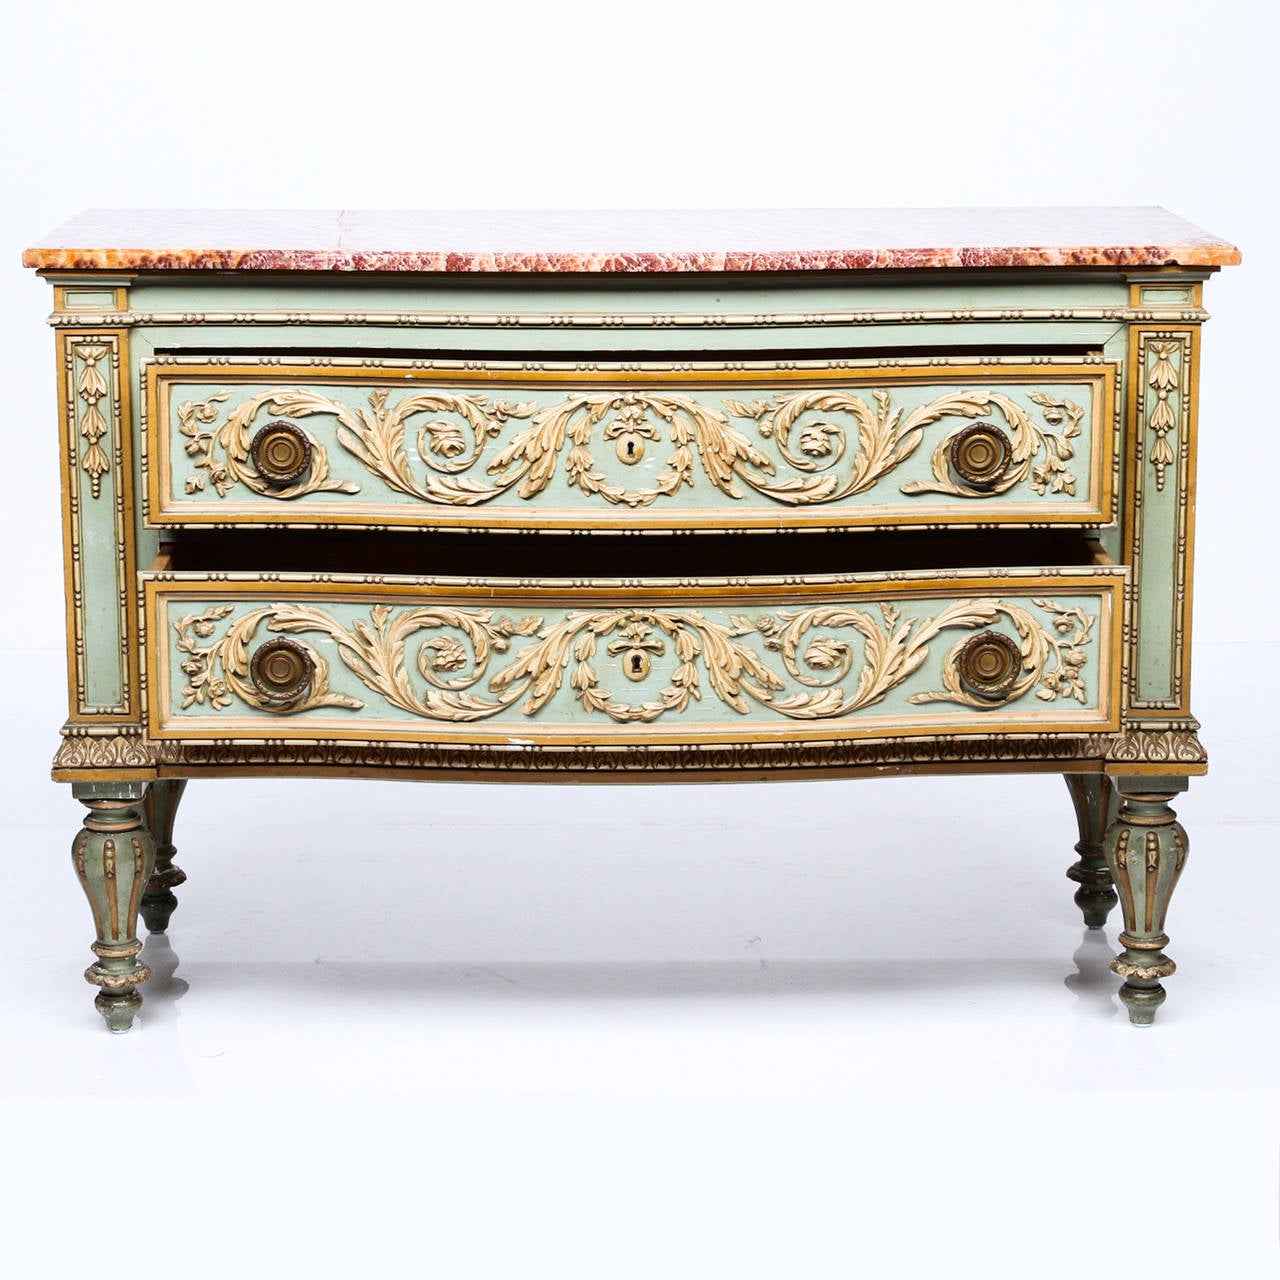 An Italian Painted Marble Top Commode from the 19th Century. This highly decorative commode is superb quality. Fine Italian craftsmanship.